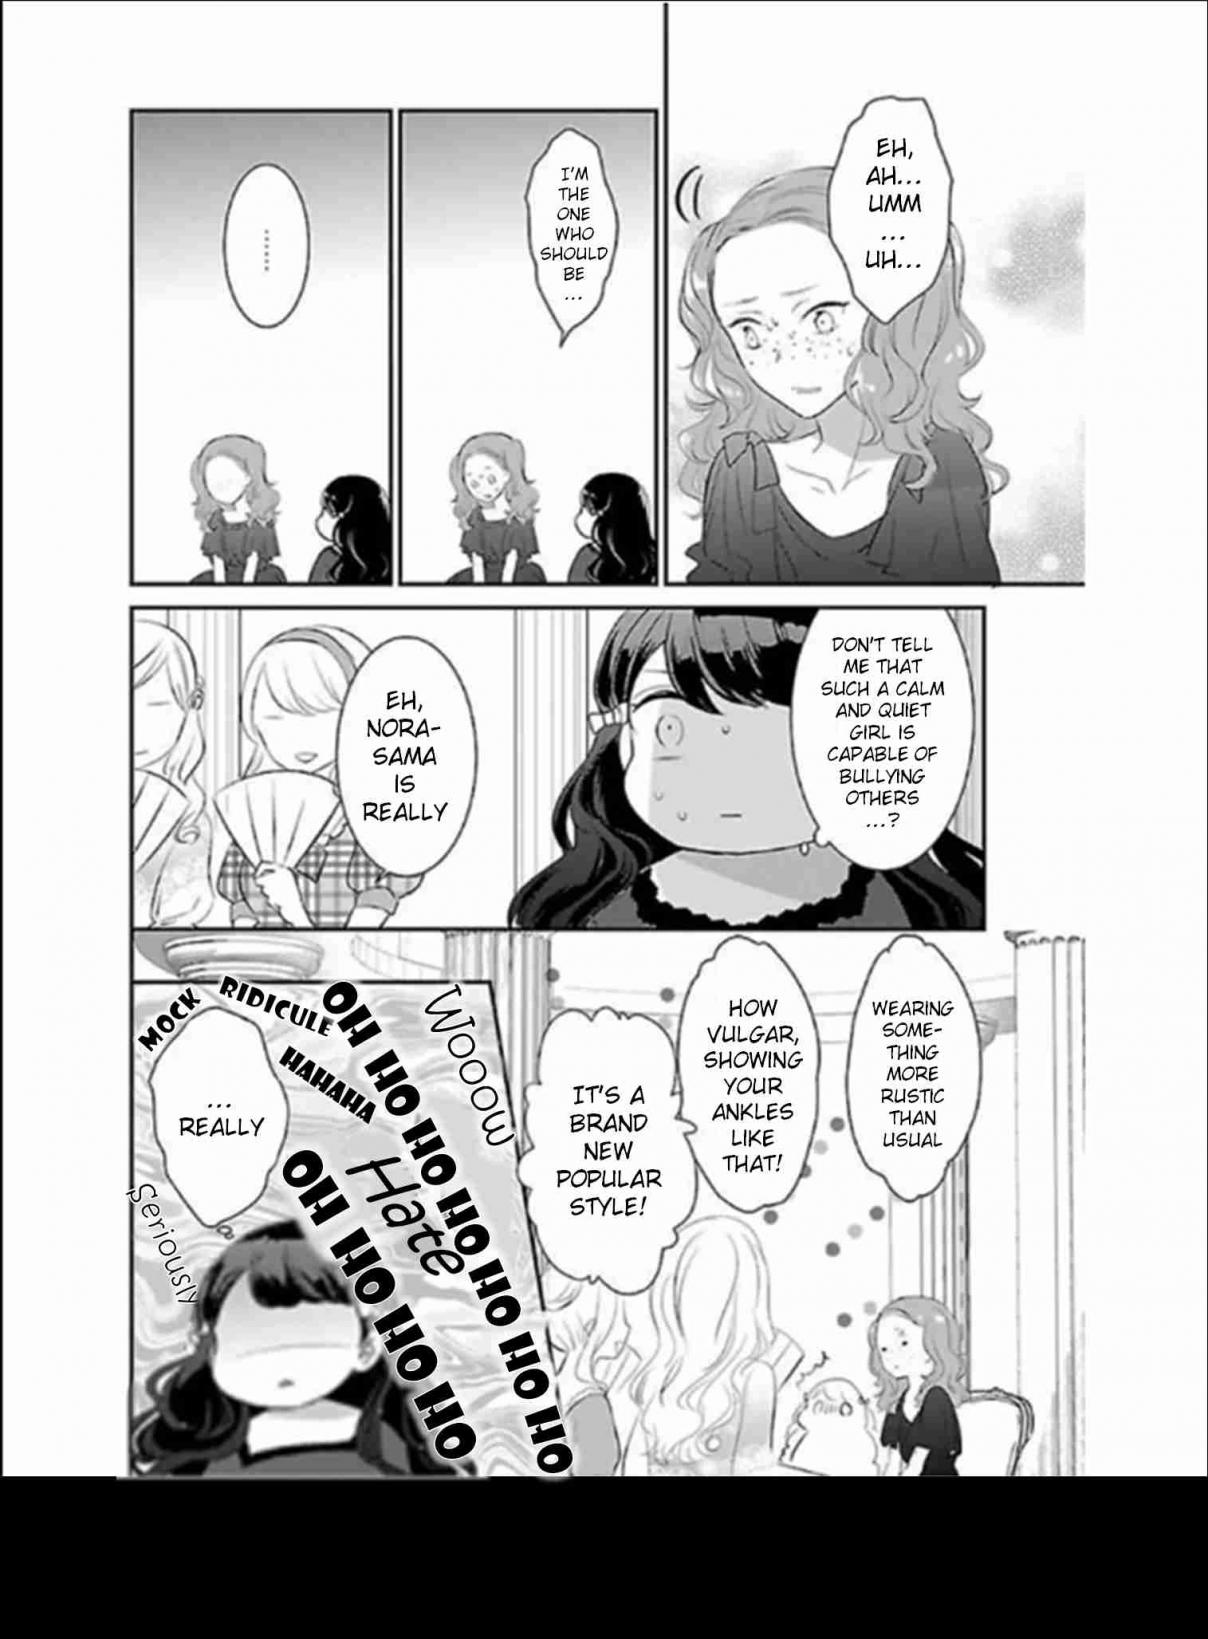 I Reincarnated as a White Pig Noble's Daughter from a Shoujo Manga Vol. 2 Ch. 4.1